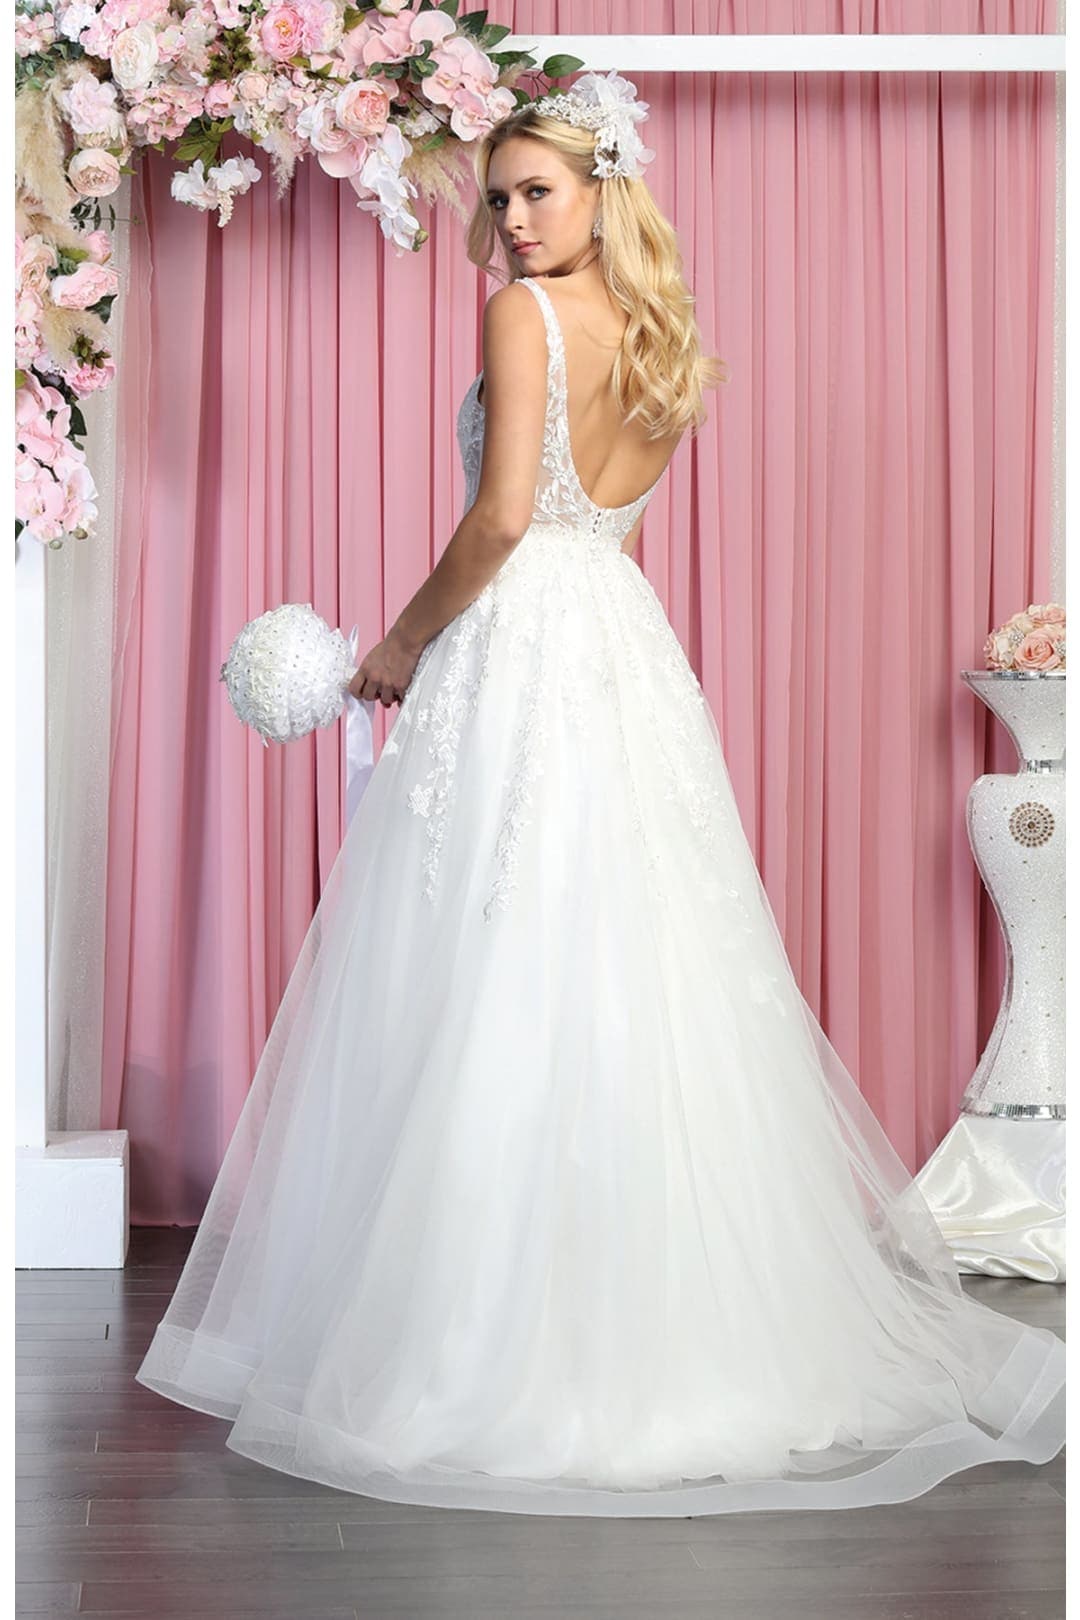 Formal Wedding Ivory Gown - Dress